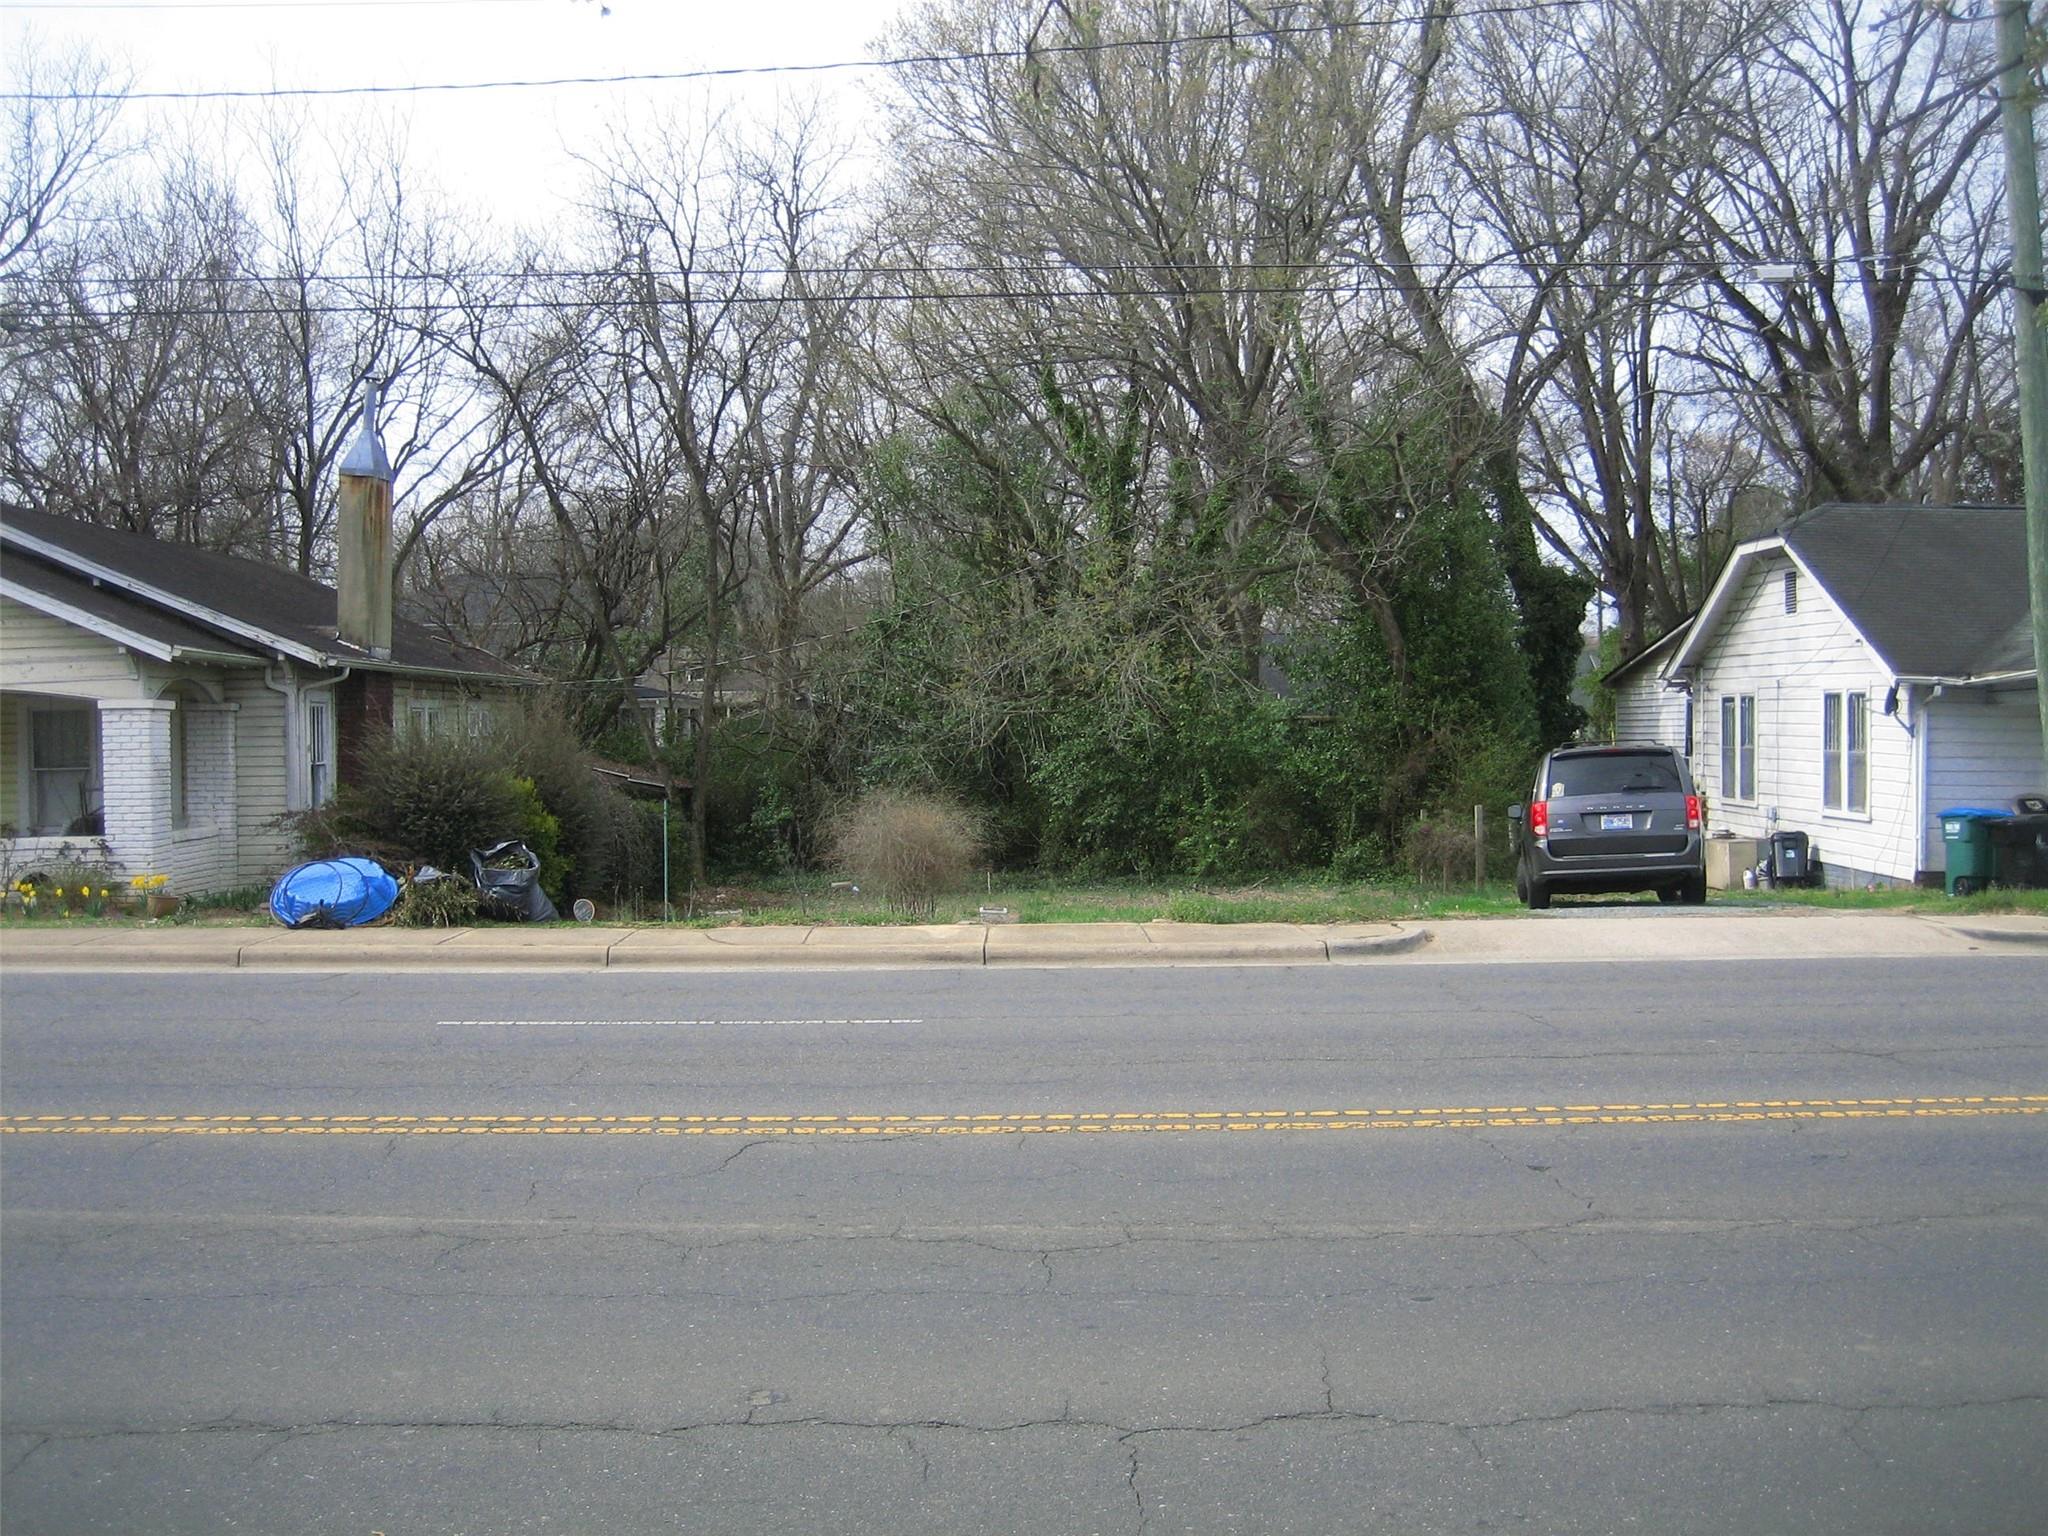 a view of a house with a yard and large trees